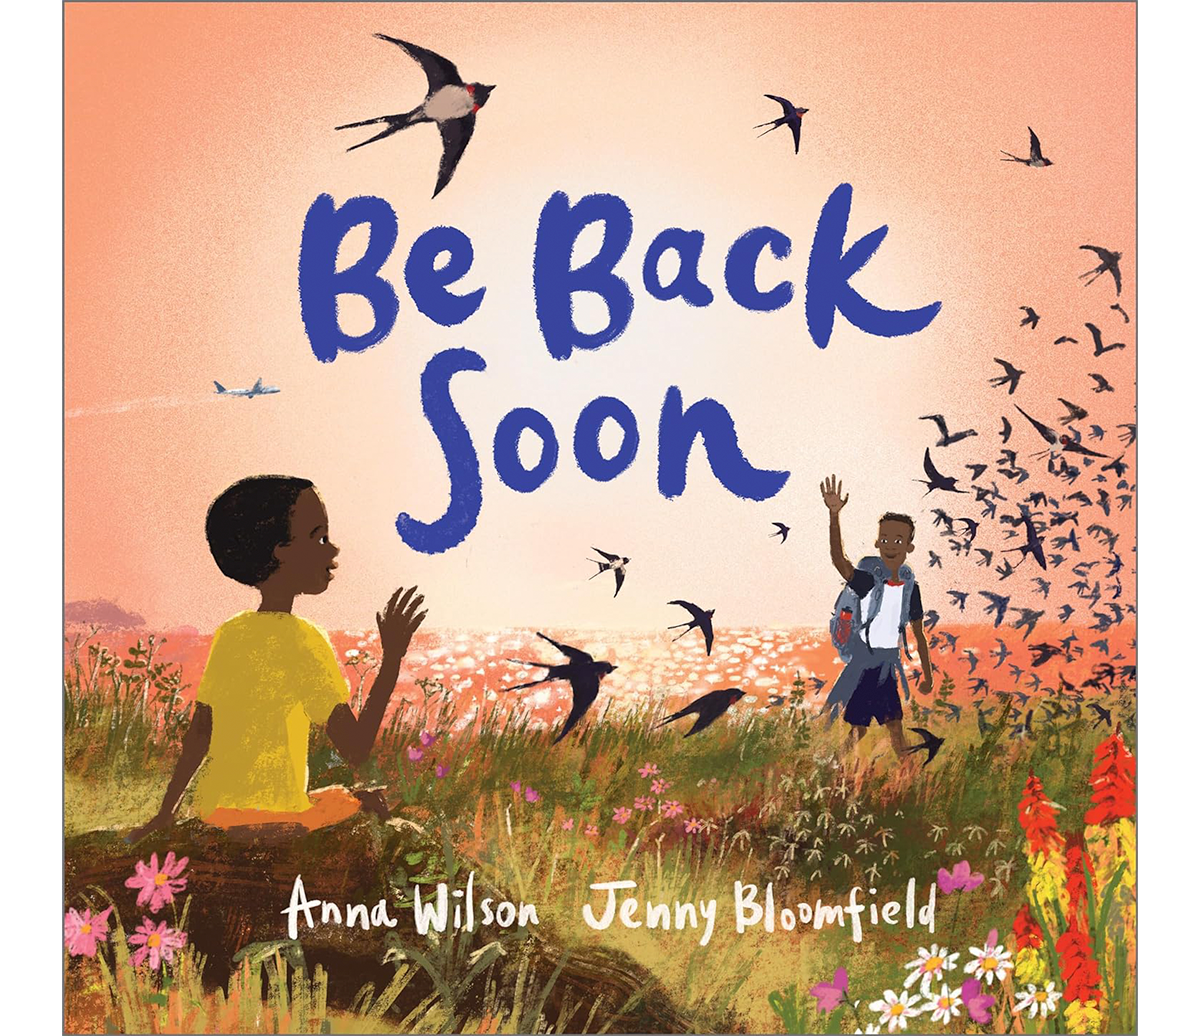 jenny-bloomfield-be-back-soon-cover.png